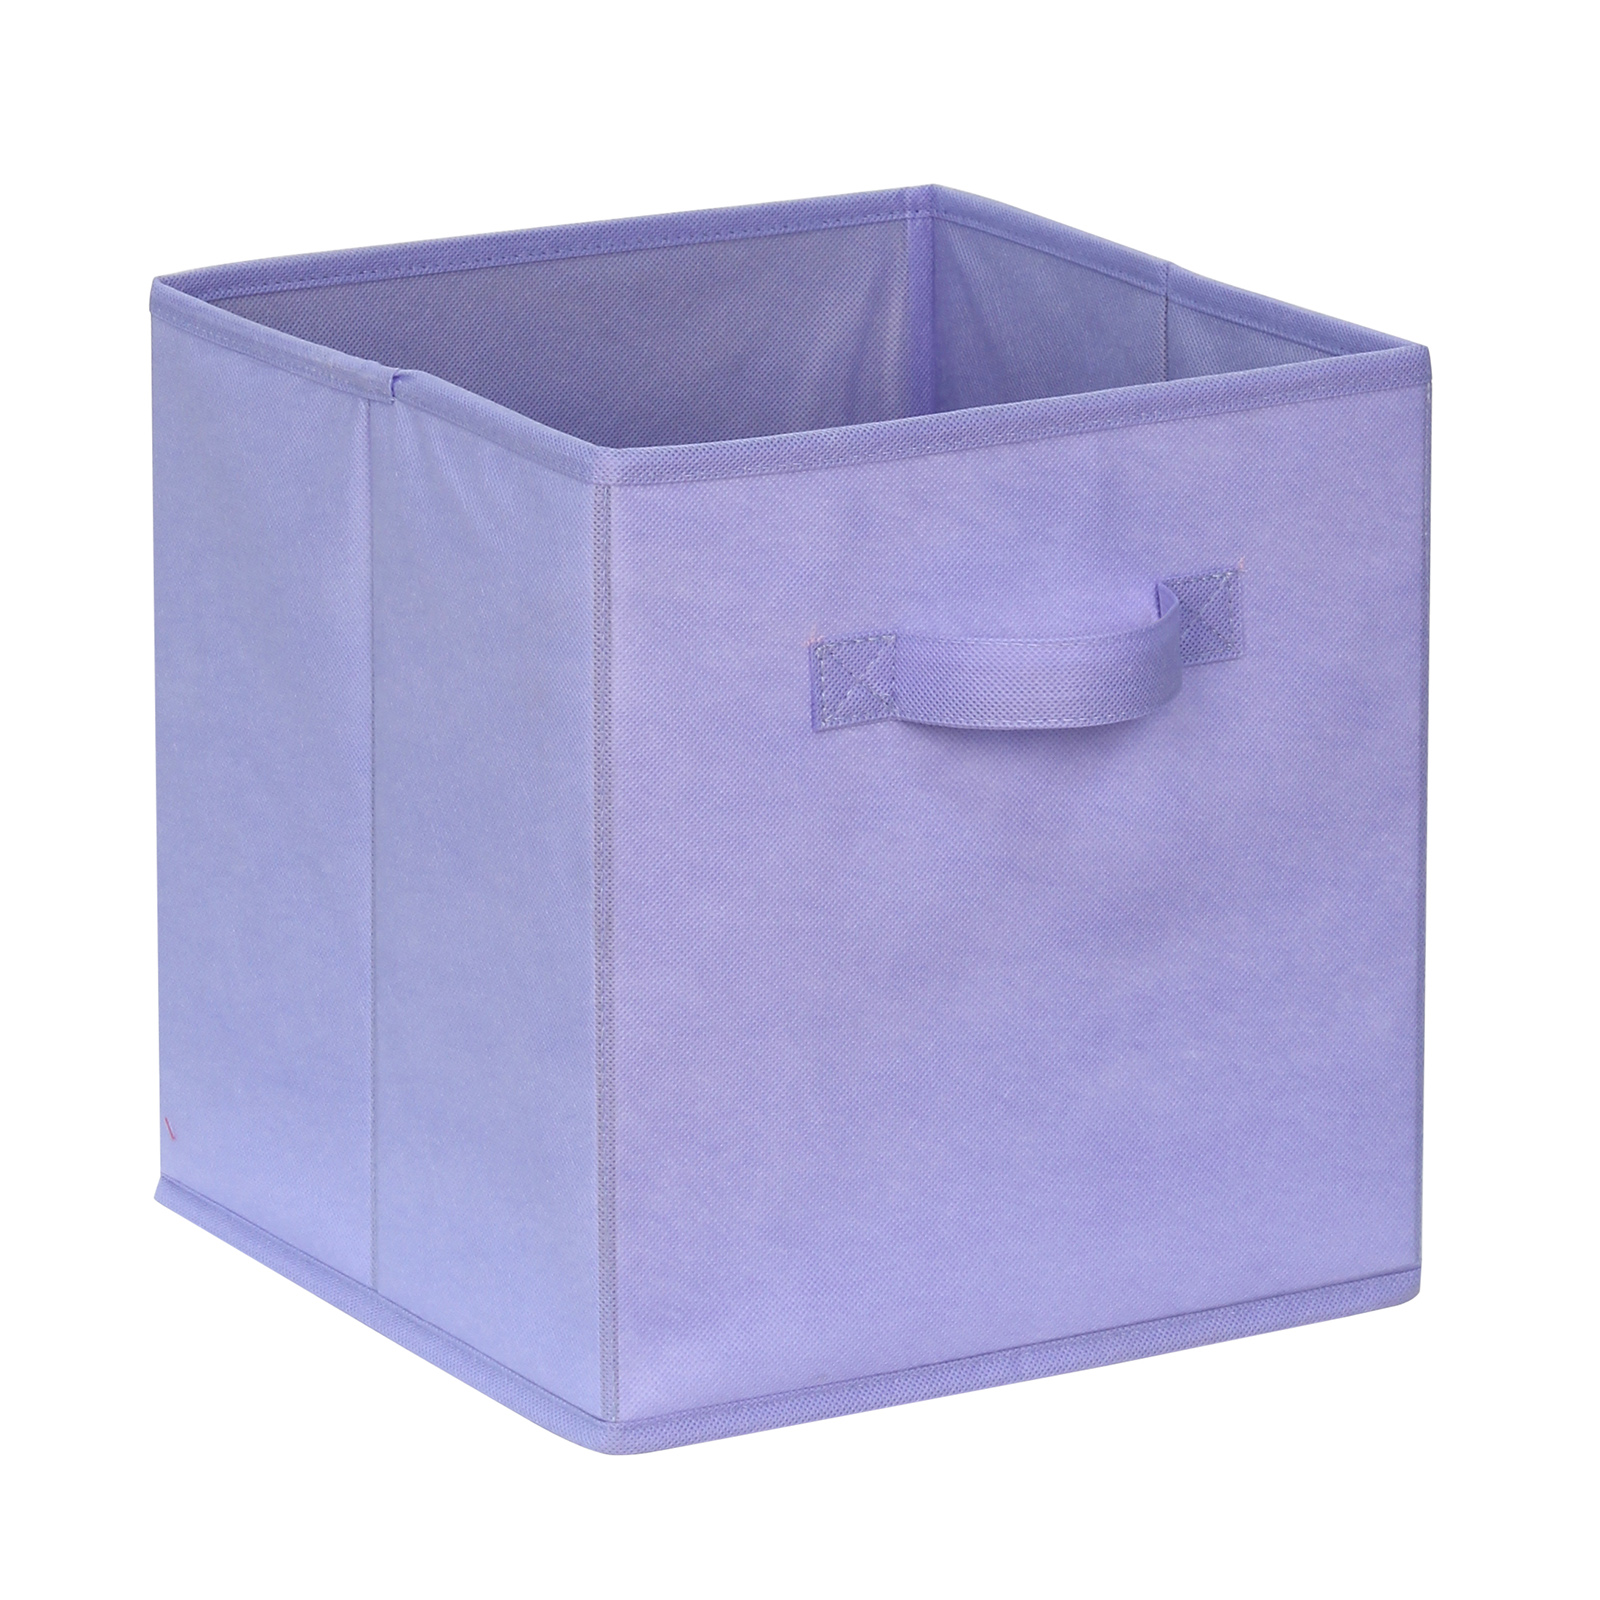 Clever Cube Fabric Insert Lilac Fusion